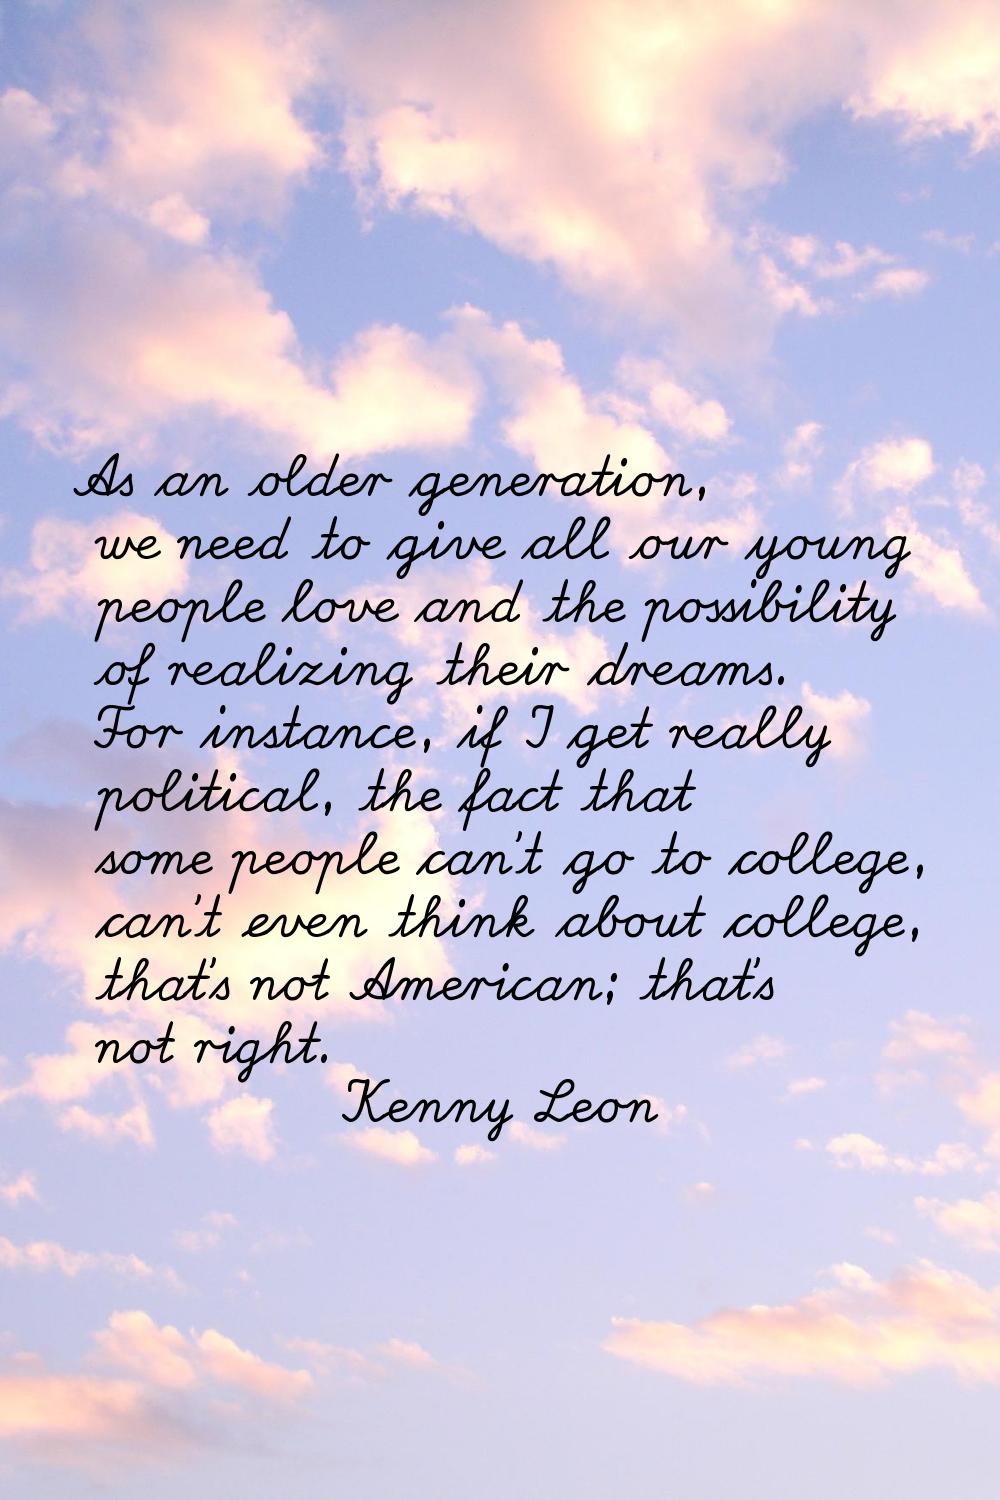 As an older generation, we need to give all our young people love and the possibility of realizing 